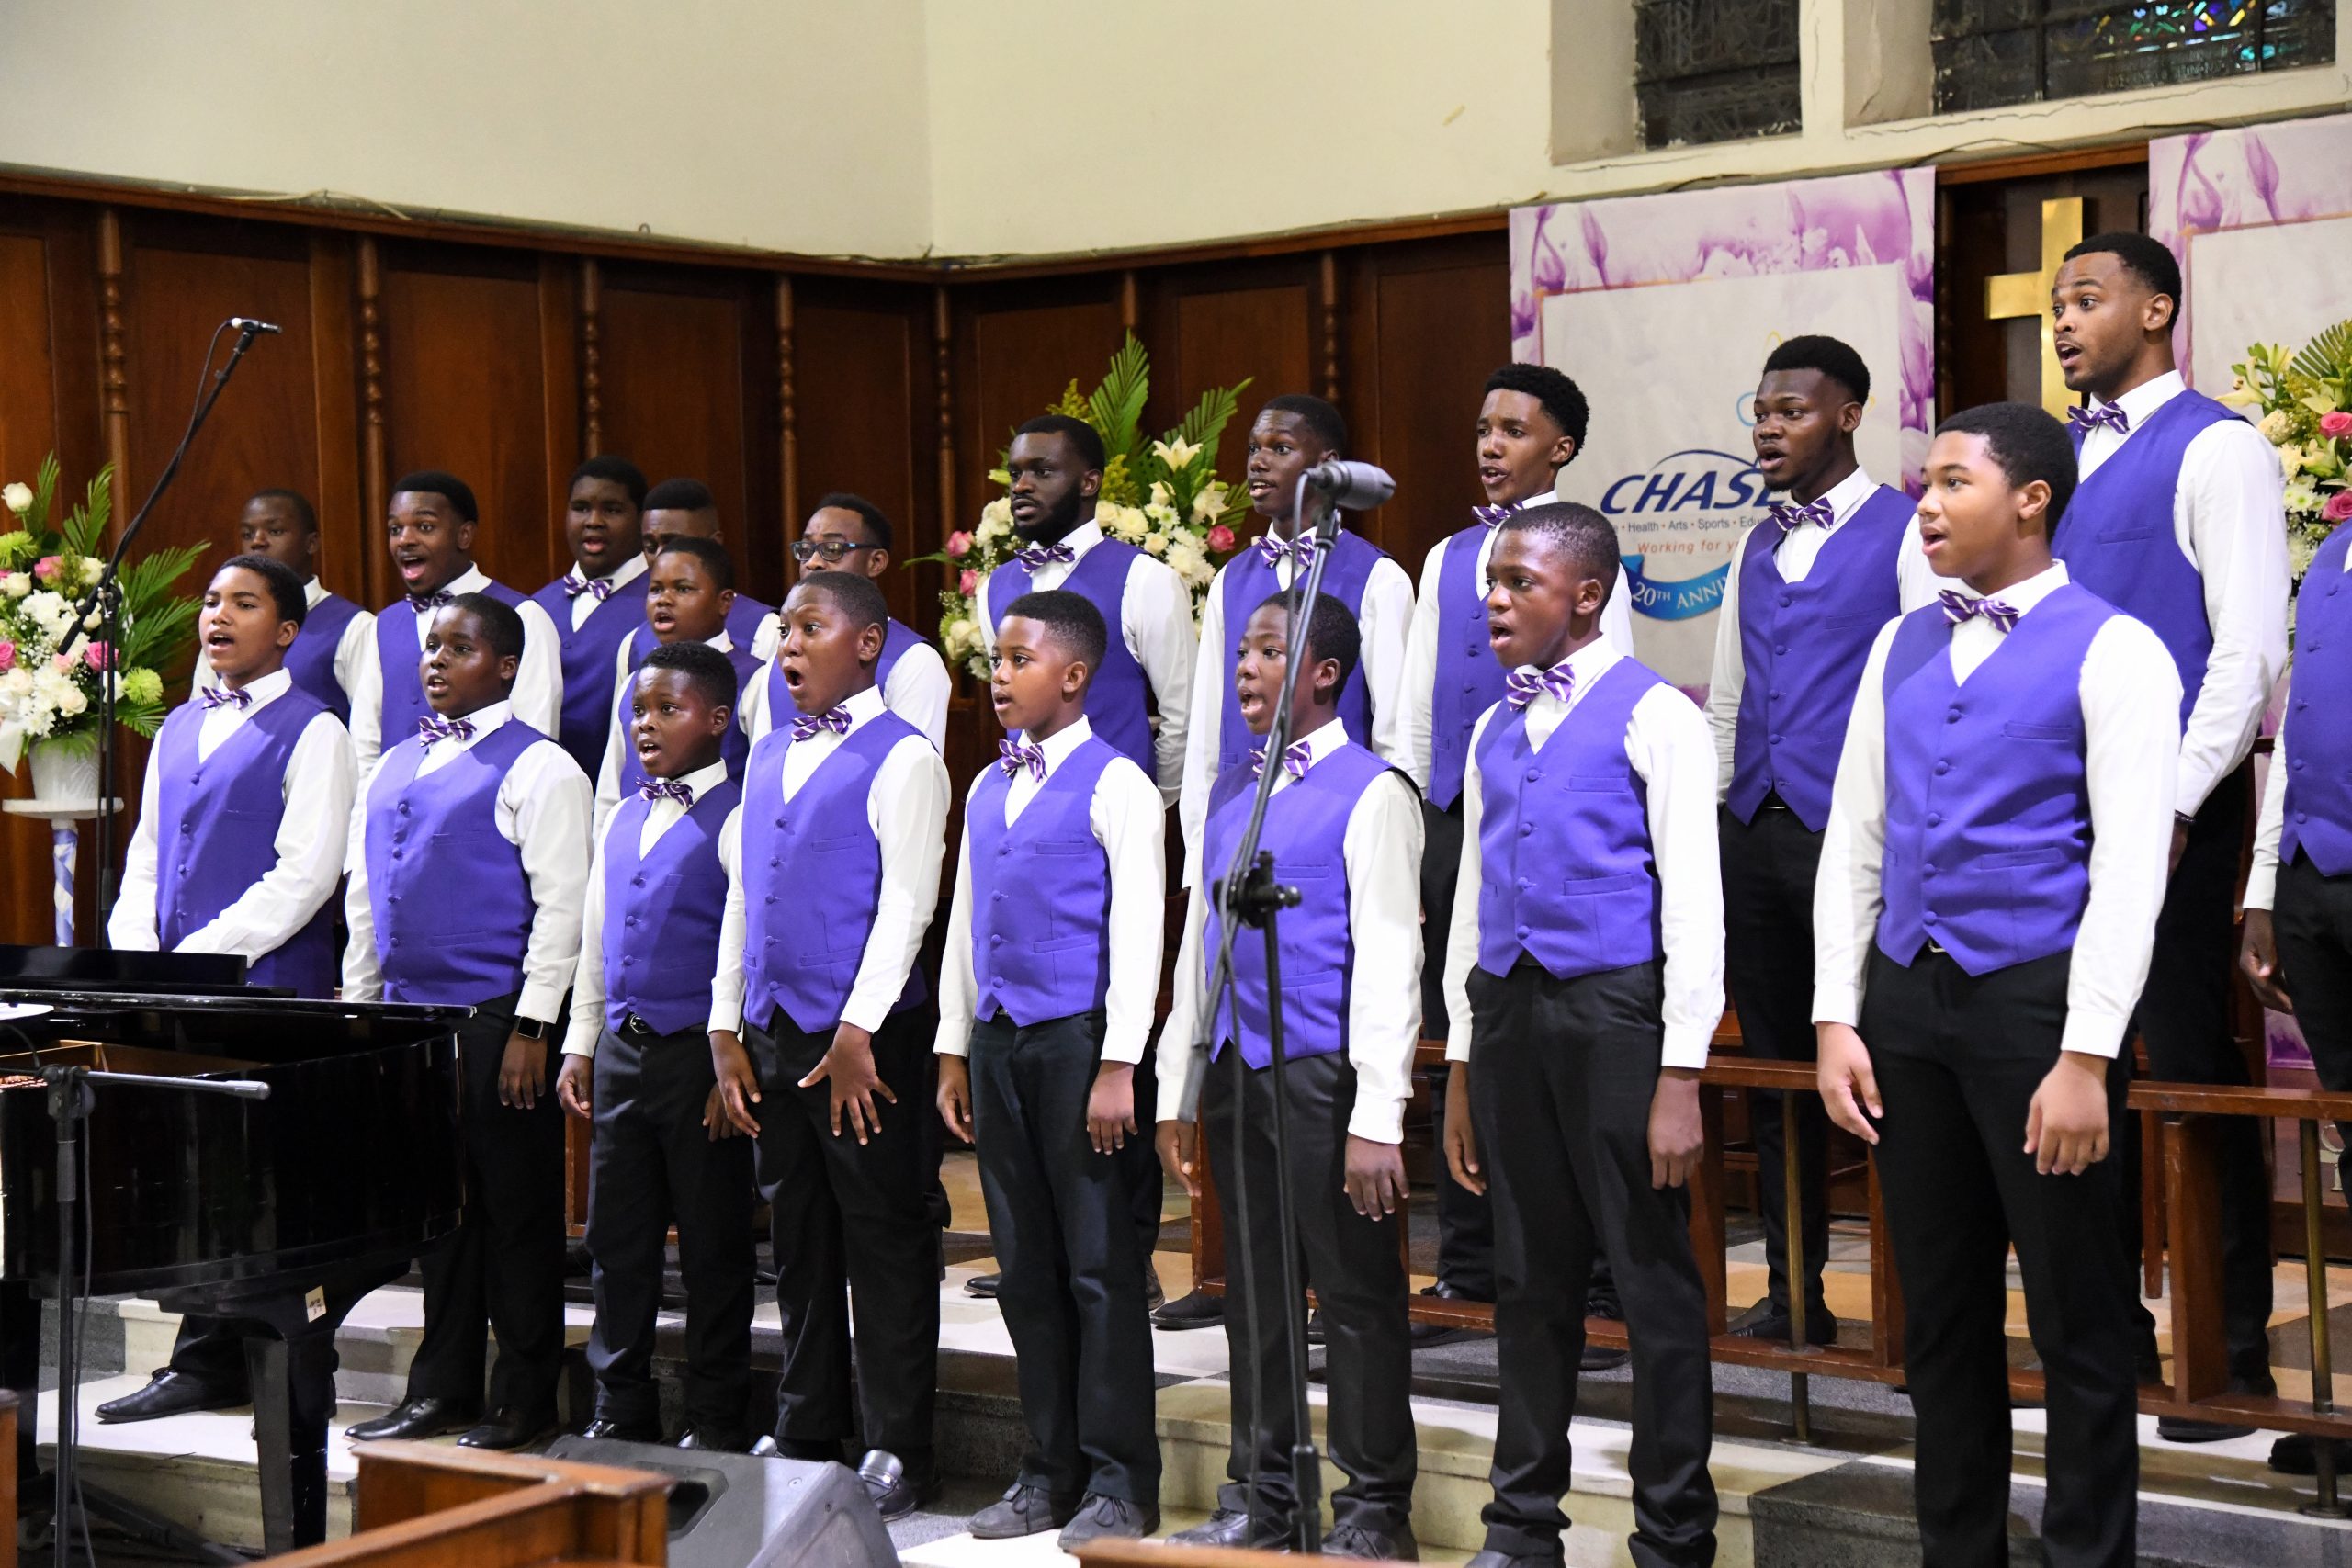 The Kingston College Chapel Choir perform at the CHASE Fund 20th Anniversary Concert held at the University Chapel on June 25.